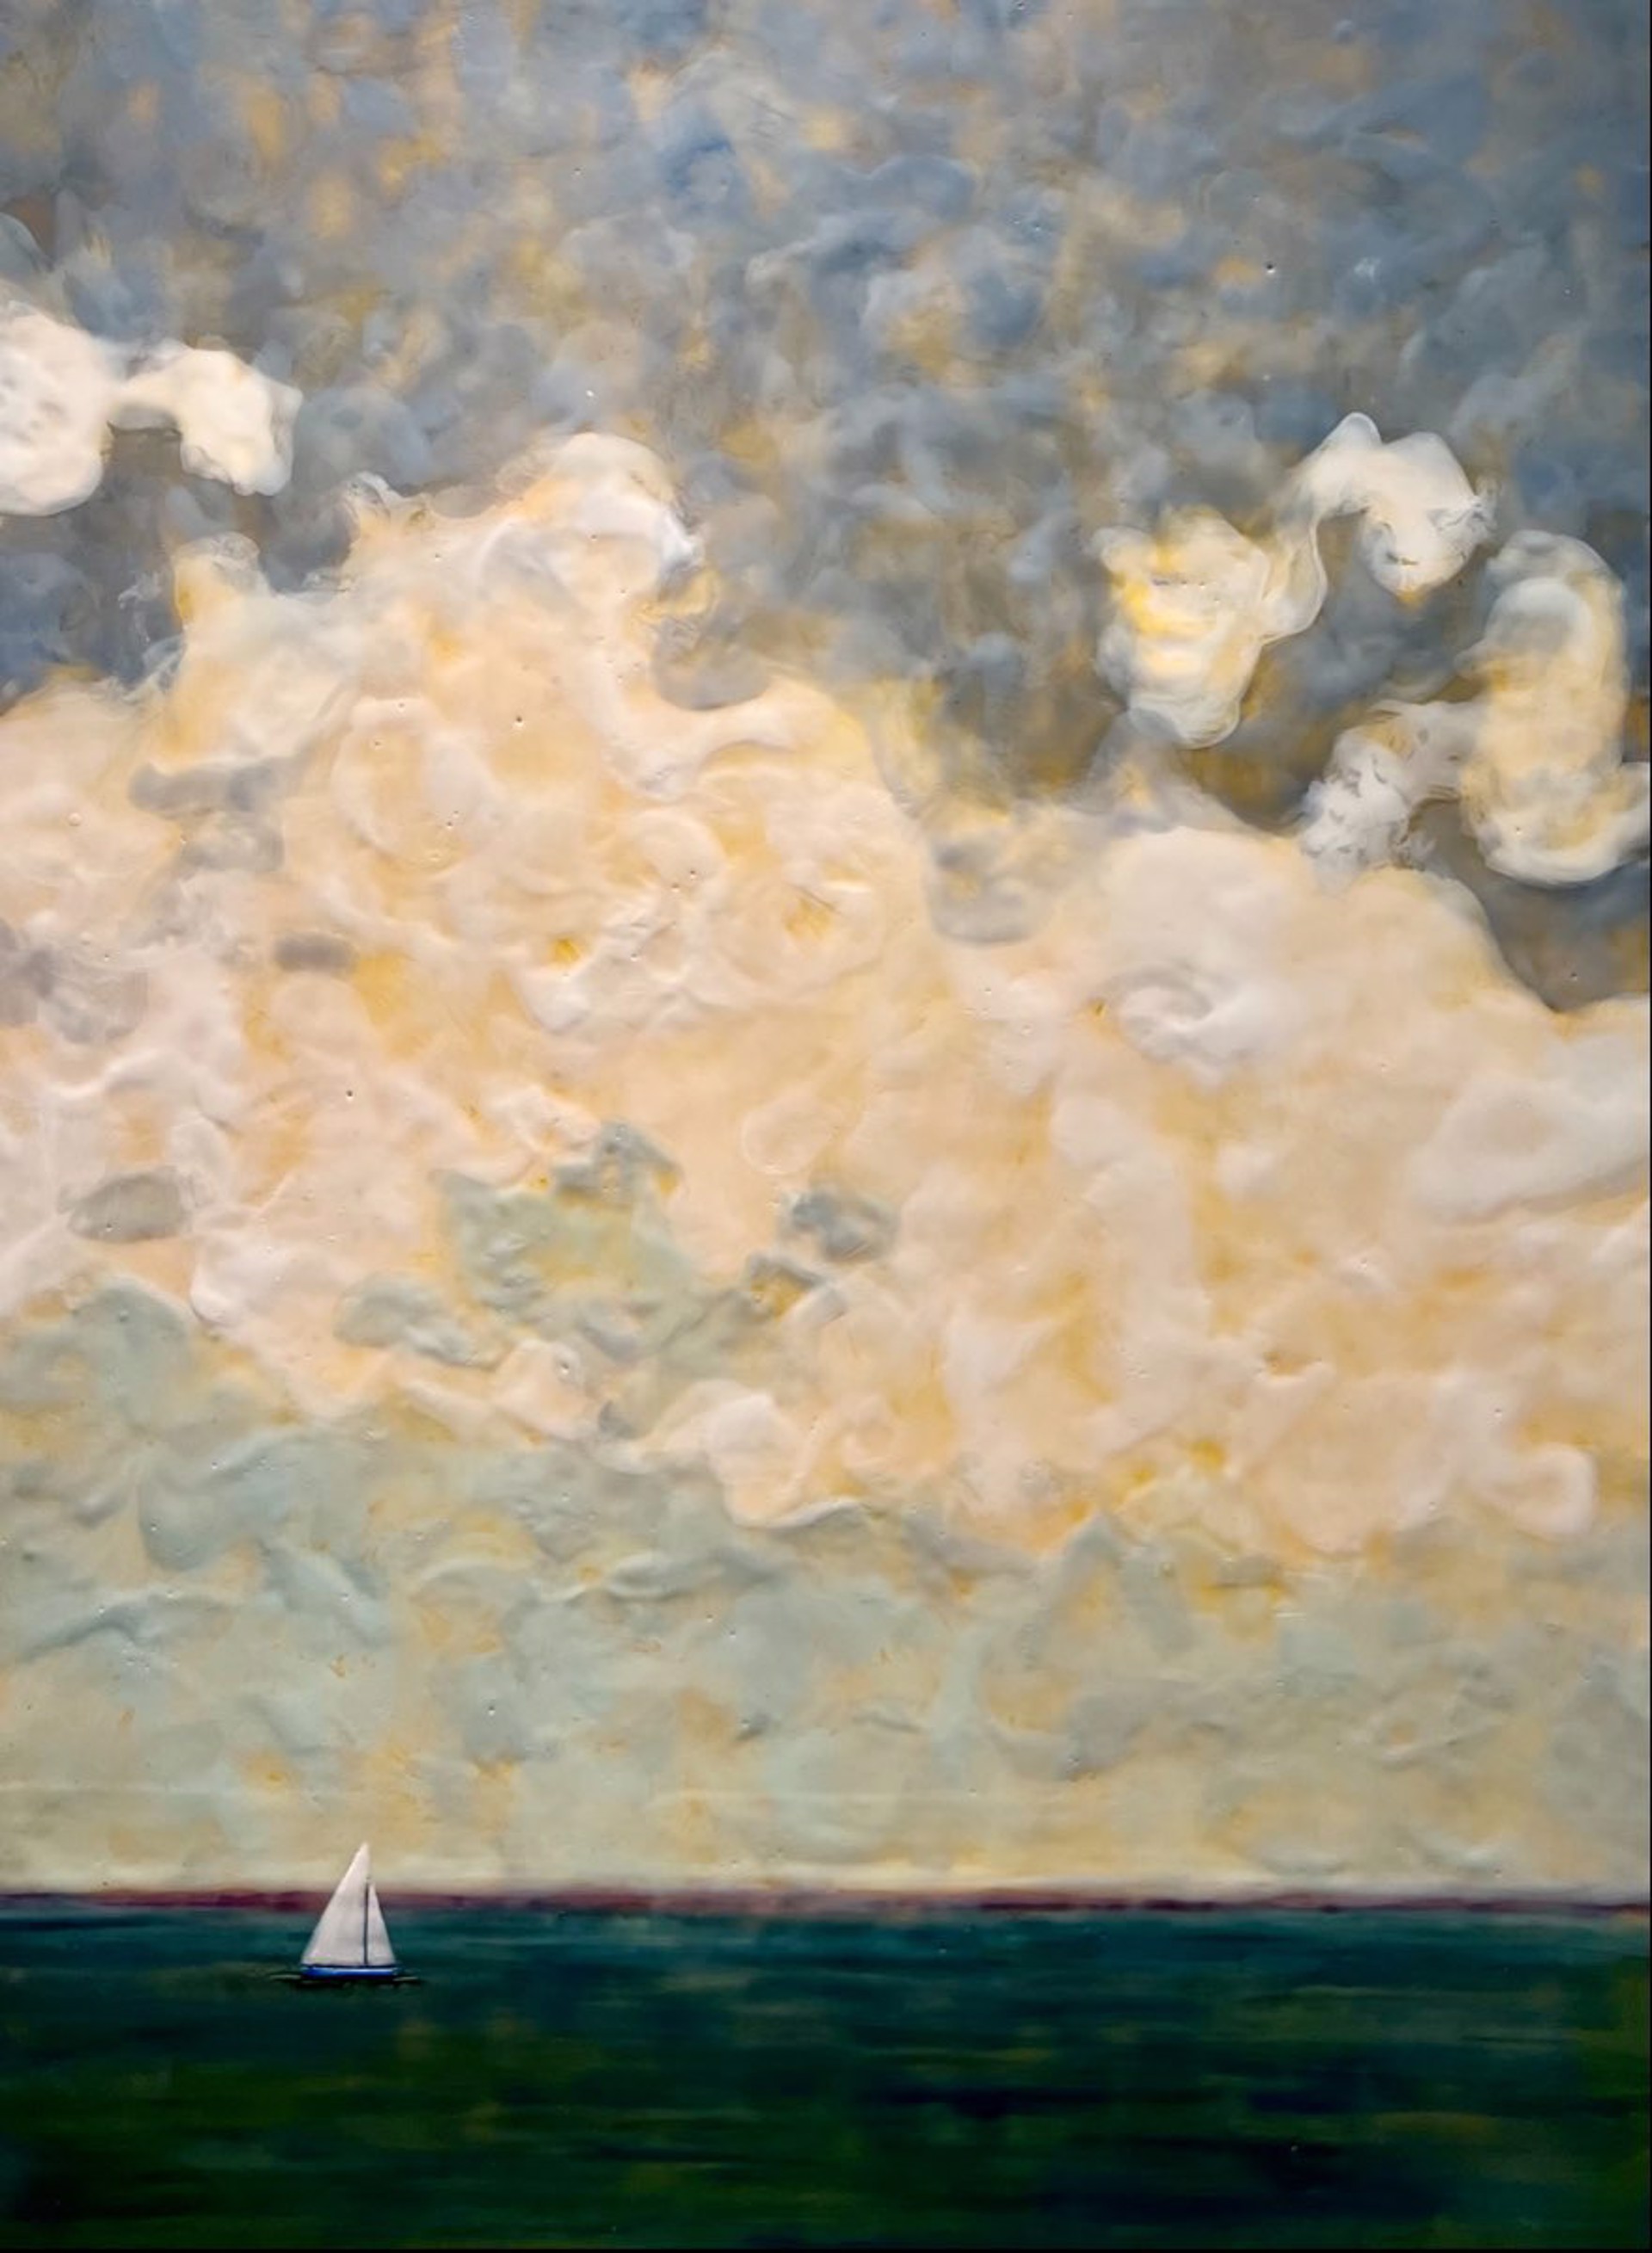 Smooth Sailing 2 by Suzanne Damrich